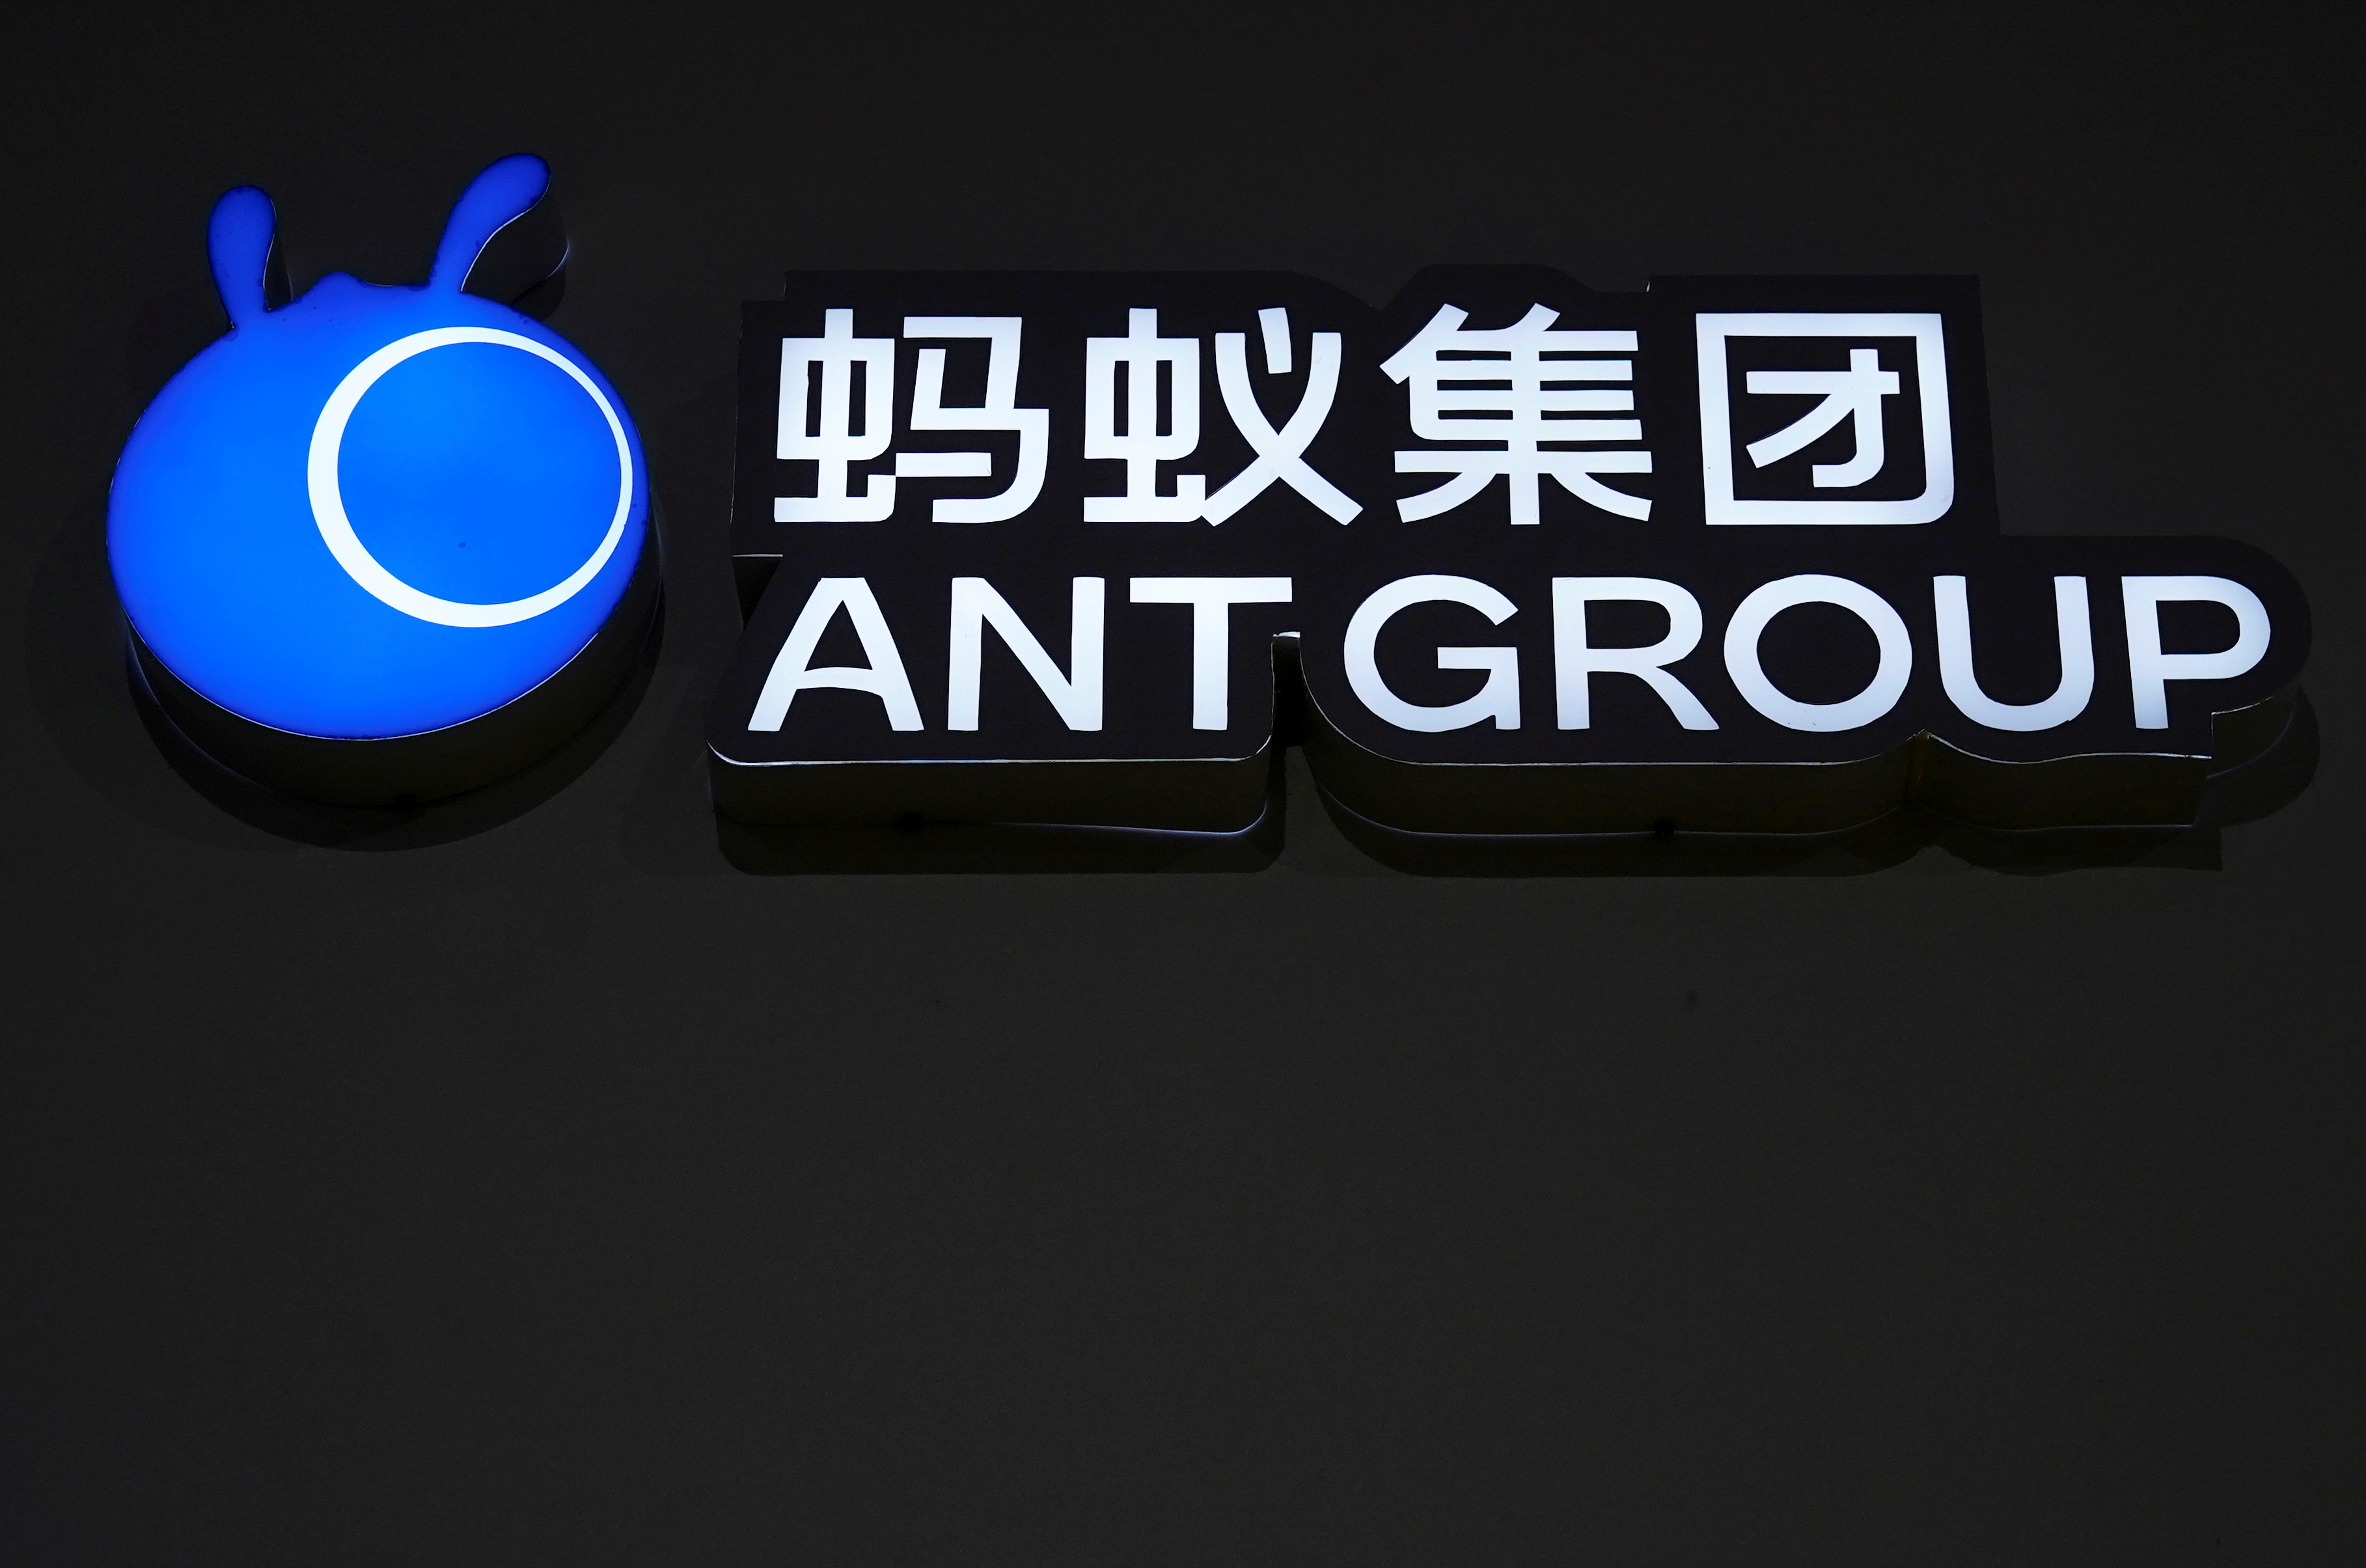 A sign of Ant Group is seen during the World Internet Conference in Wuzhen